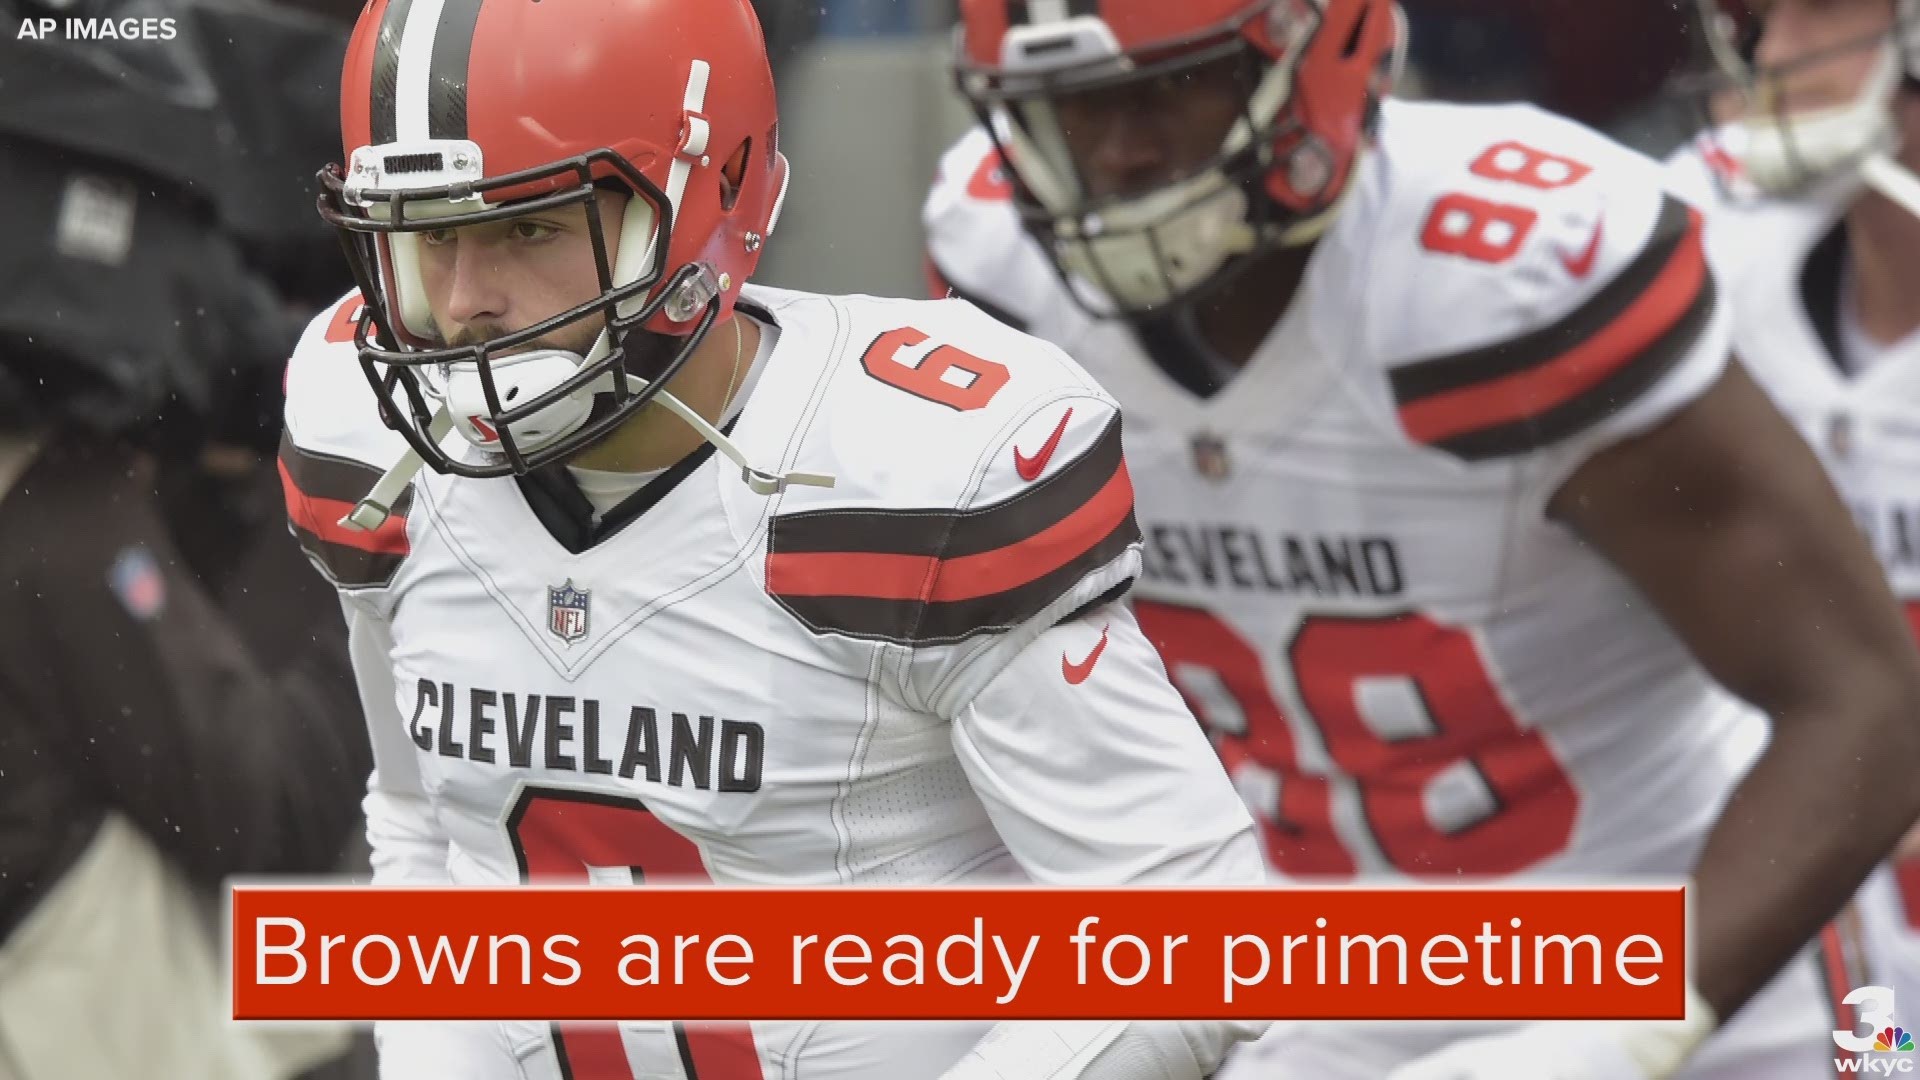 General manager John Dorsey believes the prime-time games give the country a chance to see the fans’ passion for Cleveland Browns football.